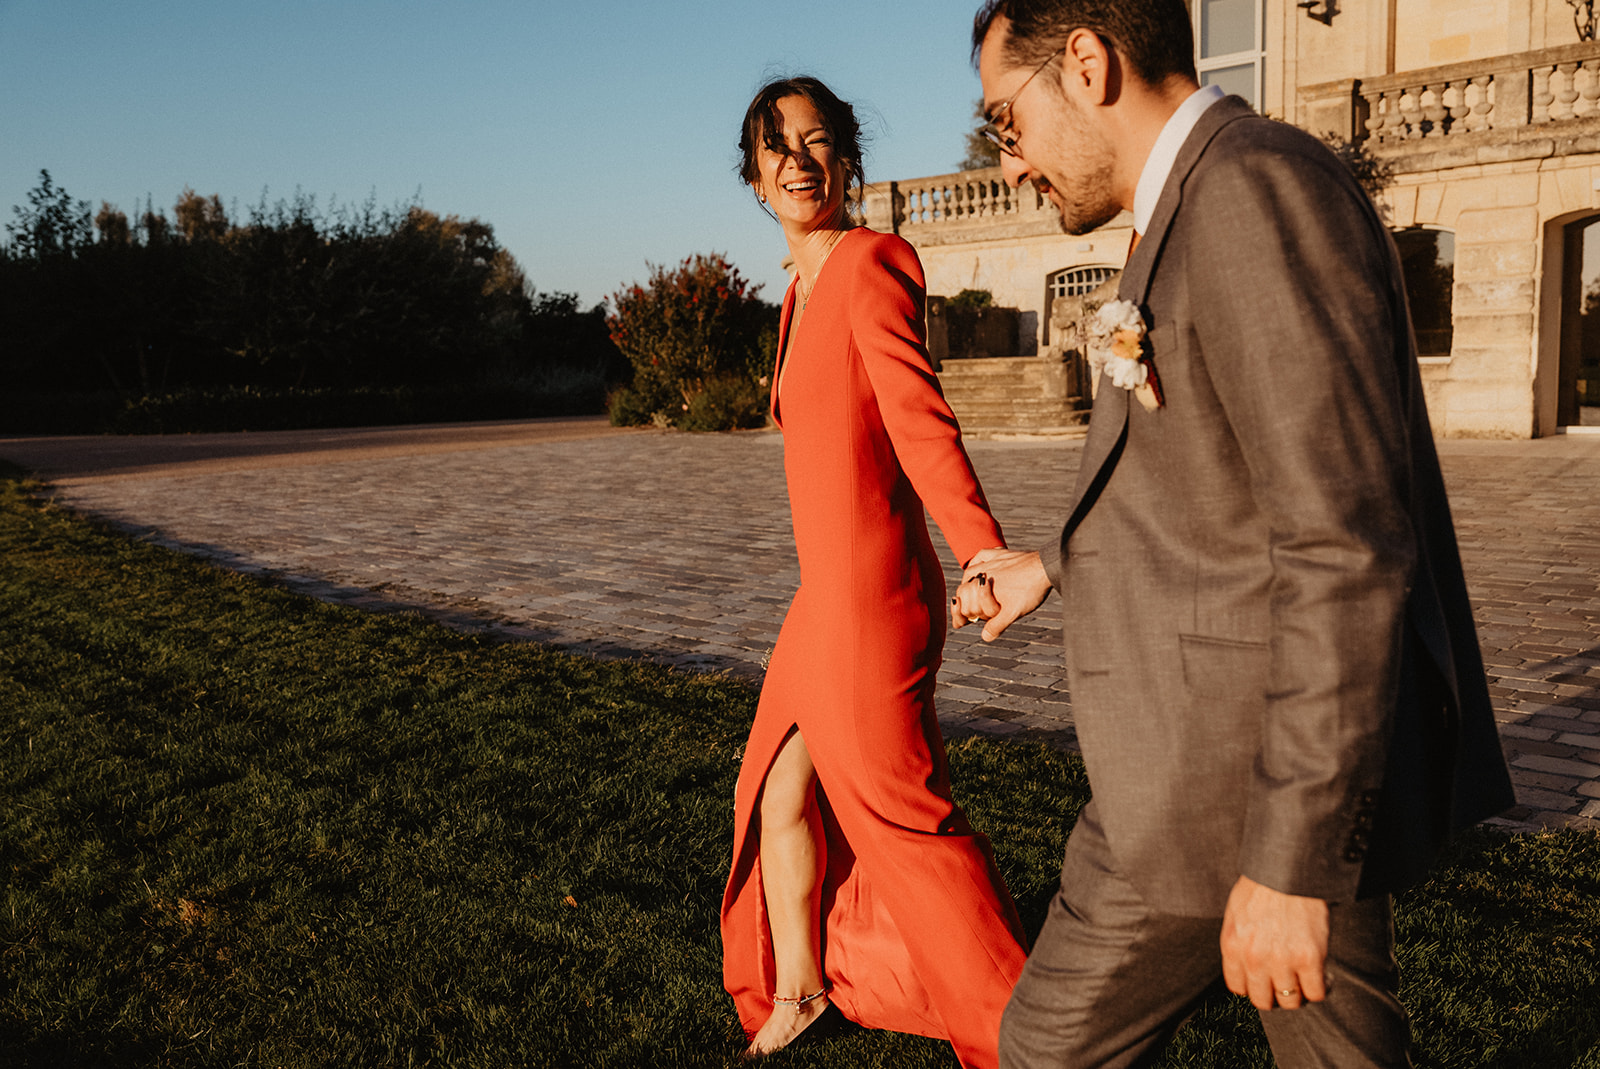 Intimist multicultural wedding in france at chateau grattequina bordeaux, autumnal theme, photos los caballeros weddings